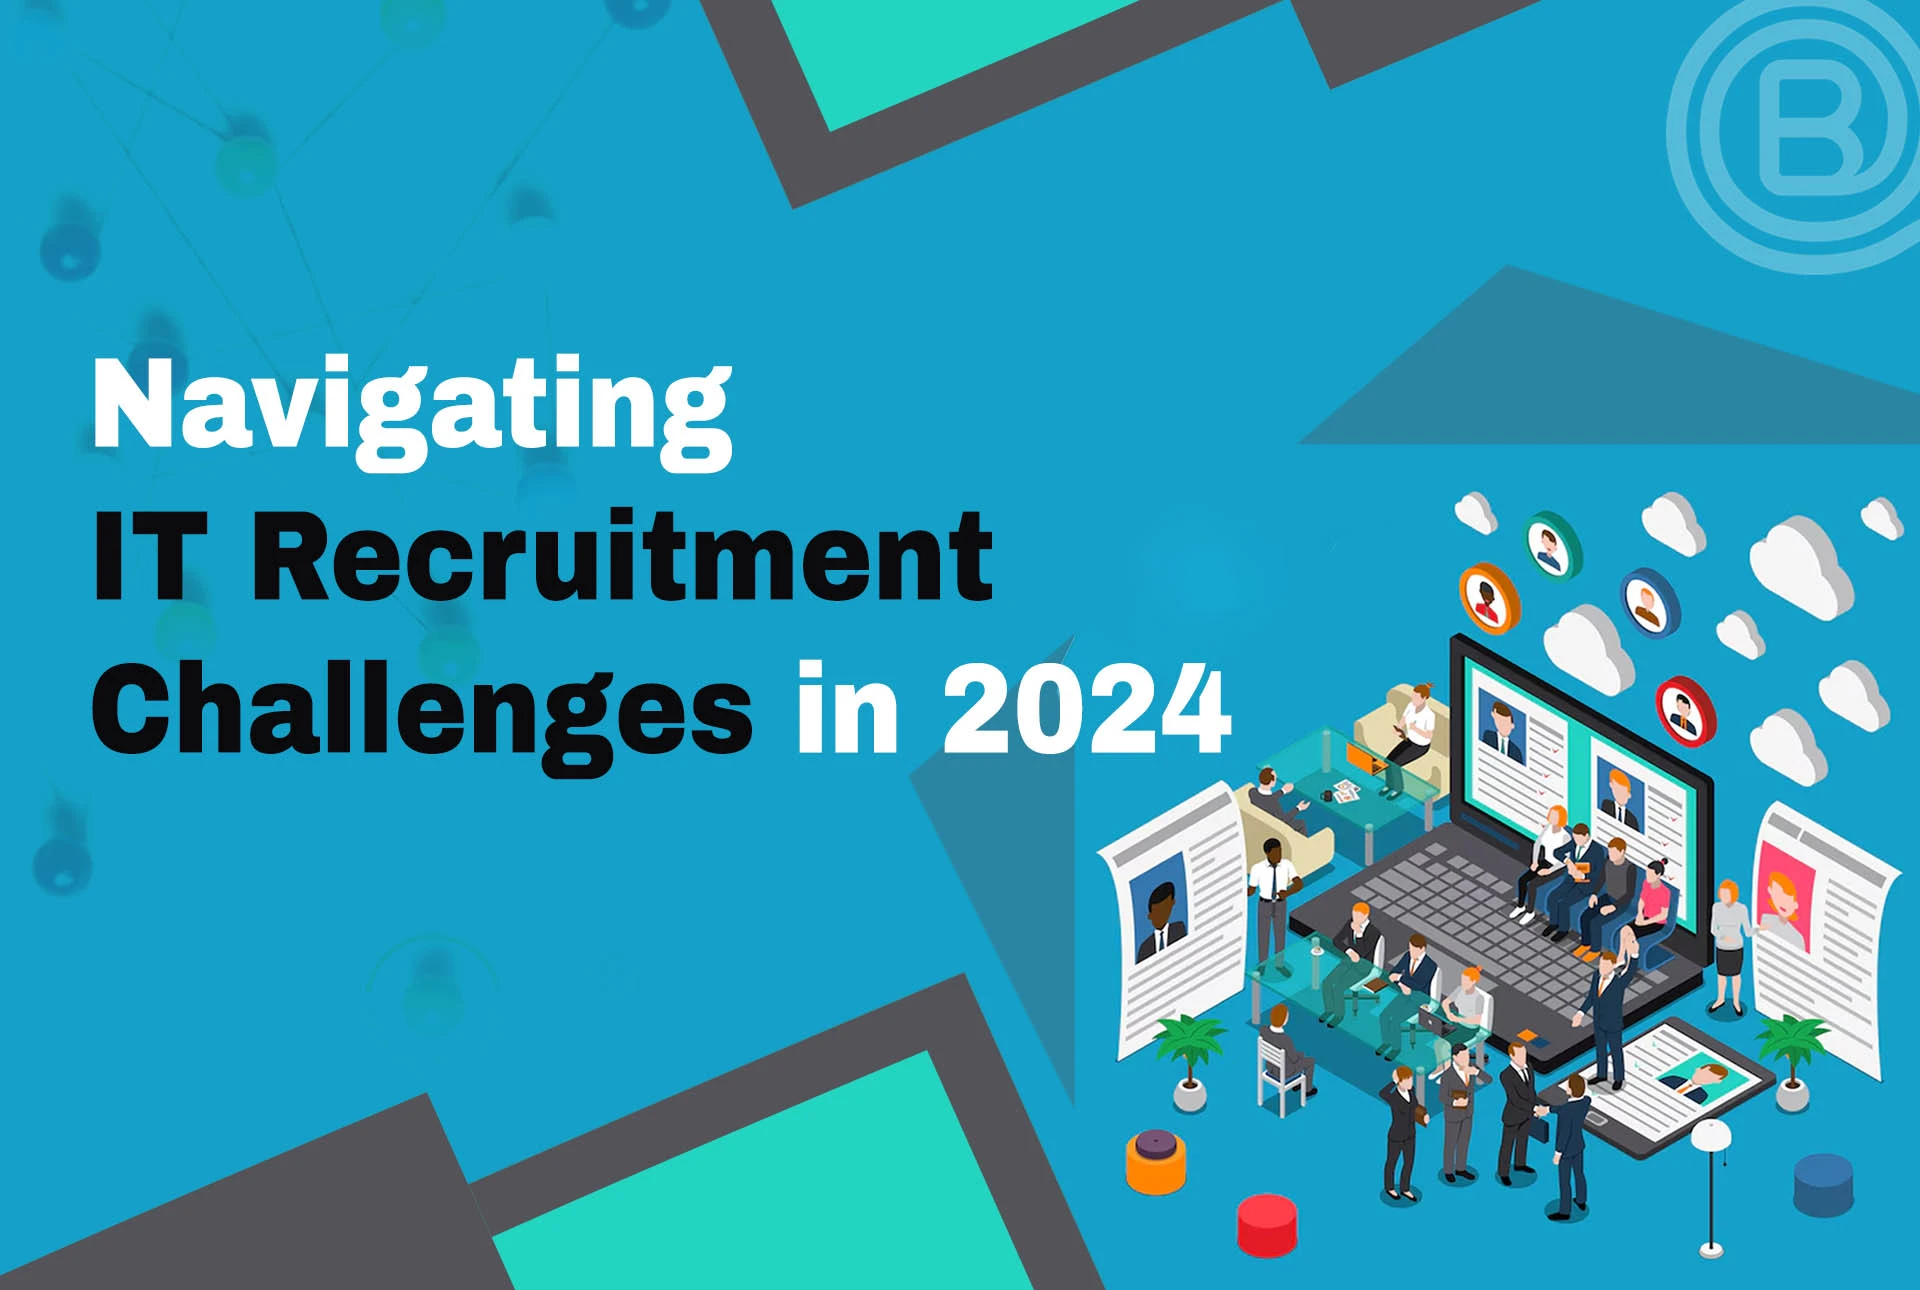 Navigating IT Recruitment Challenges in 2024